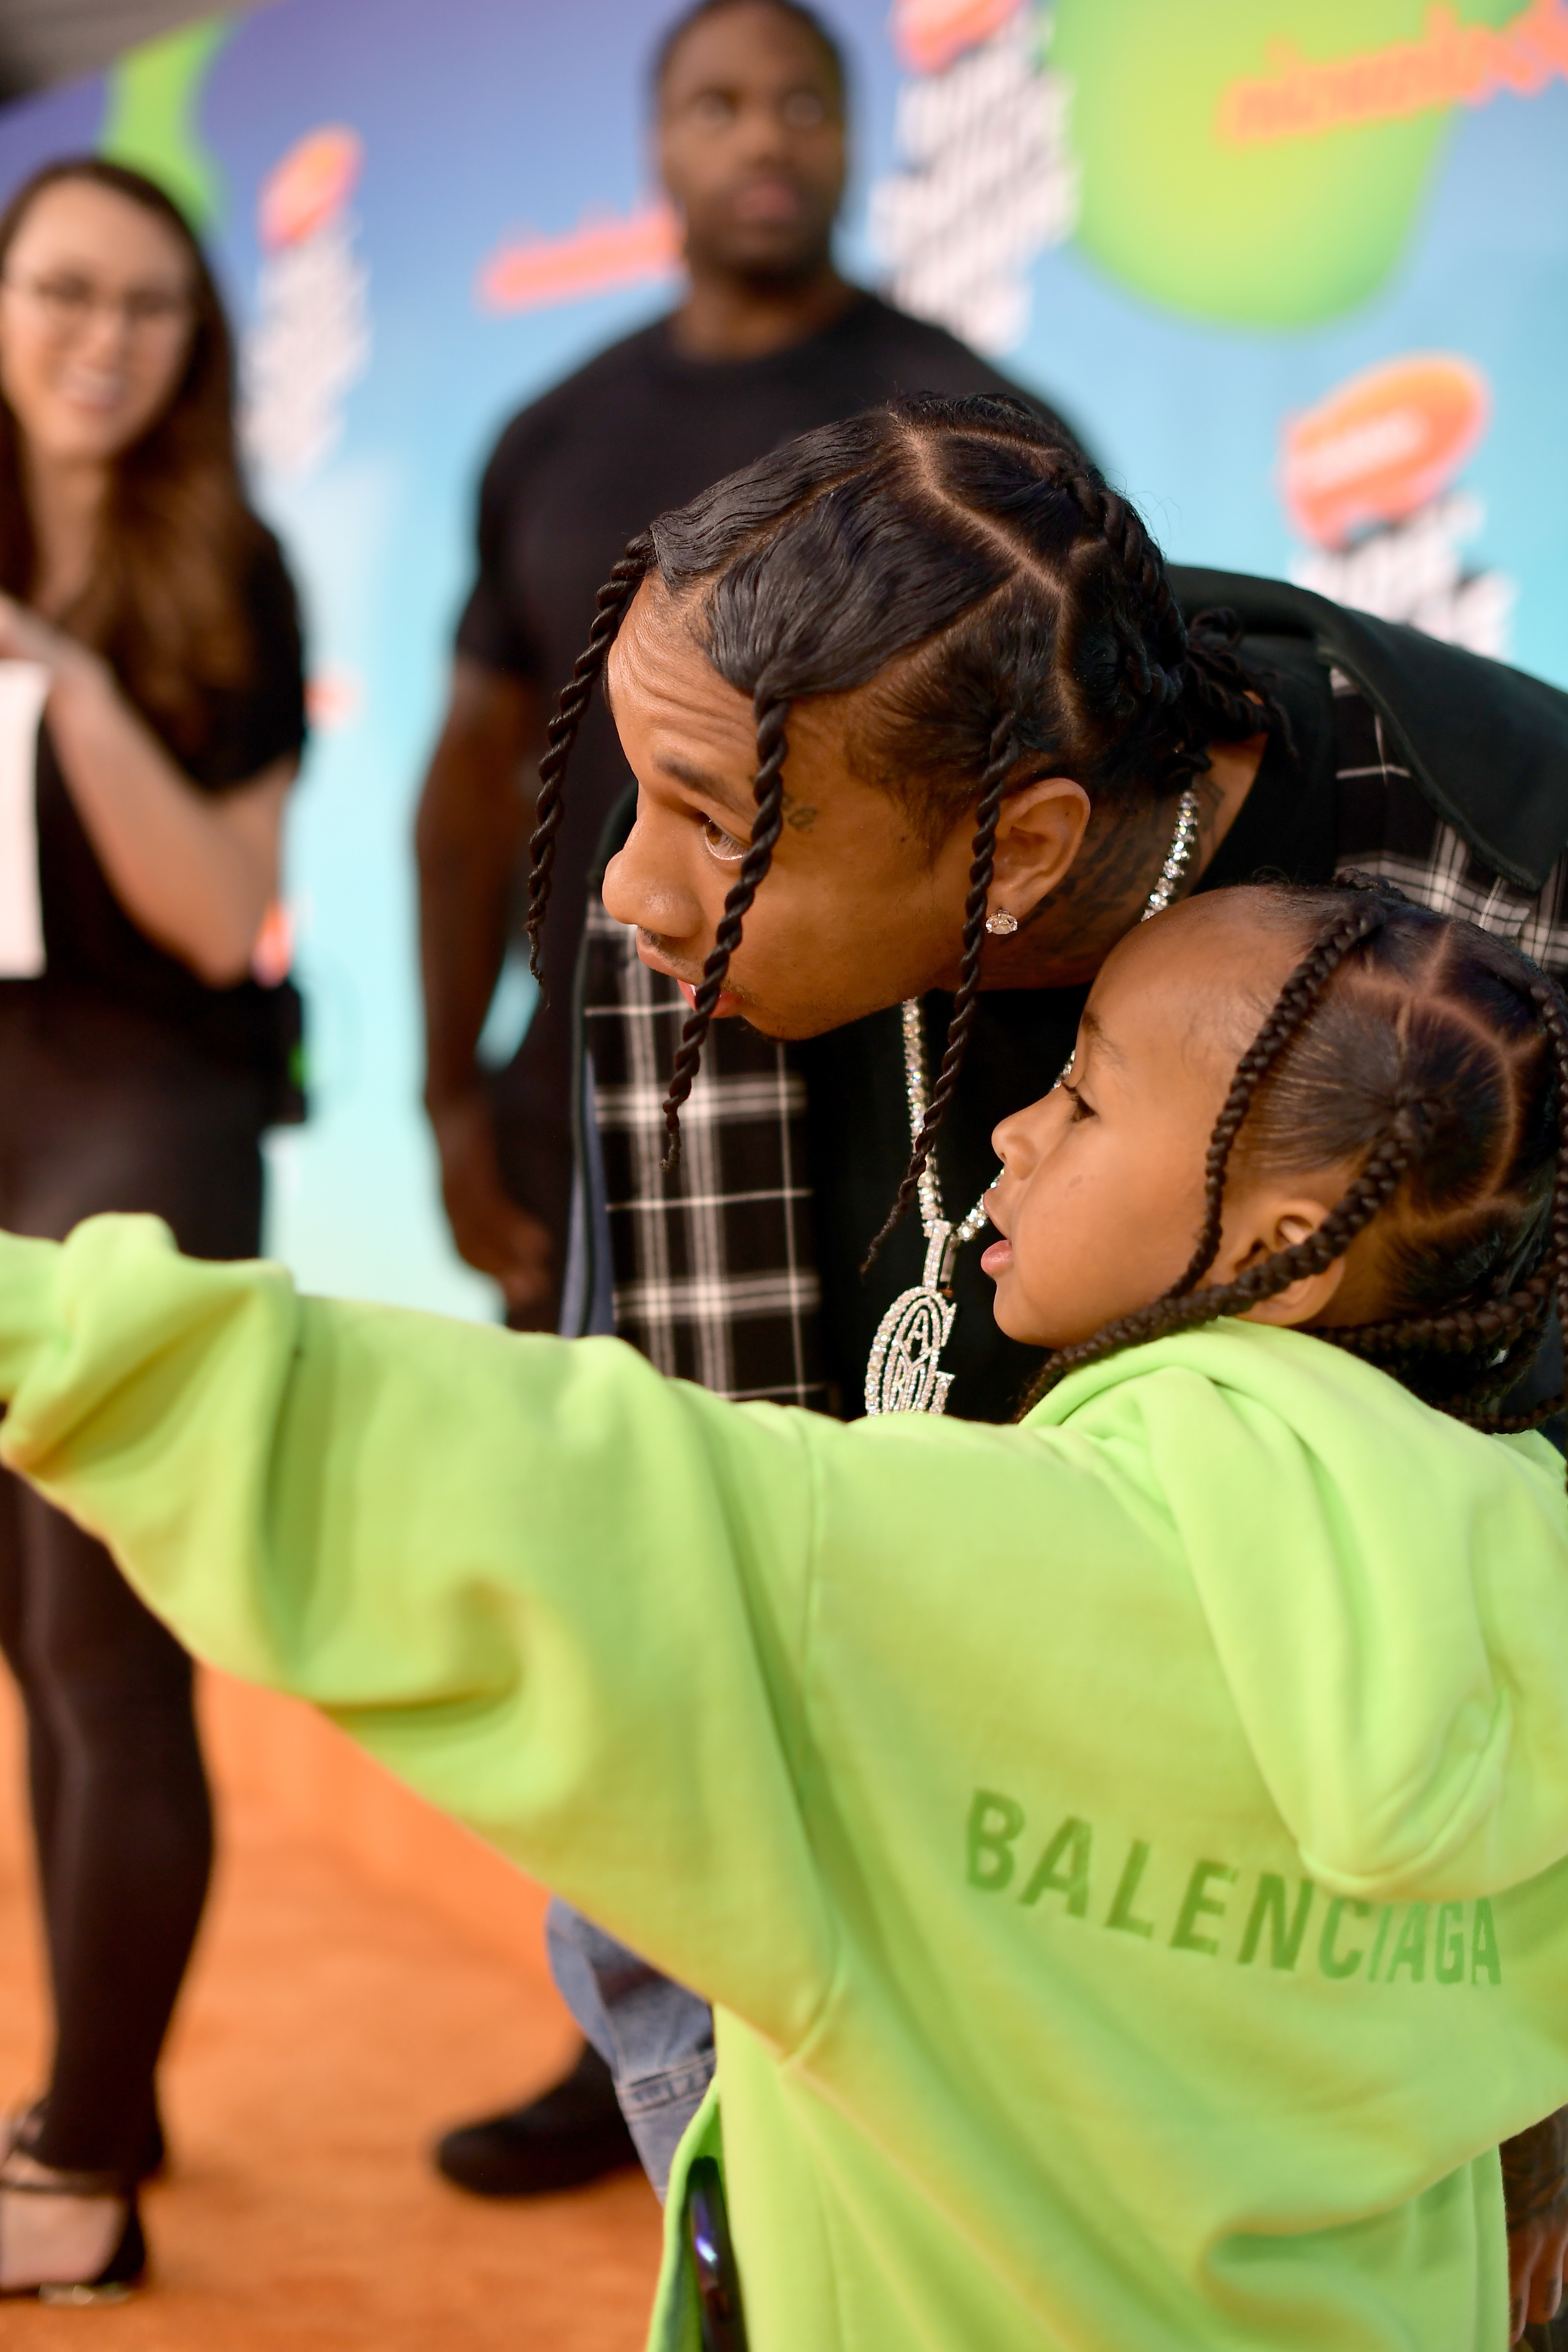 Close-up of Tyga at a media event with one of his children